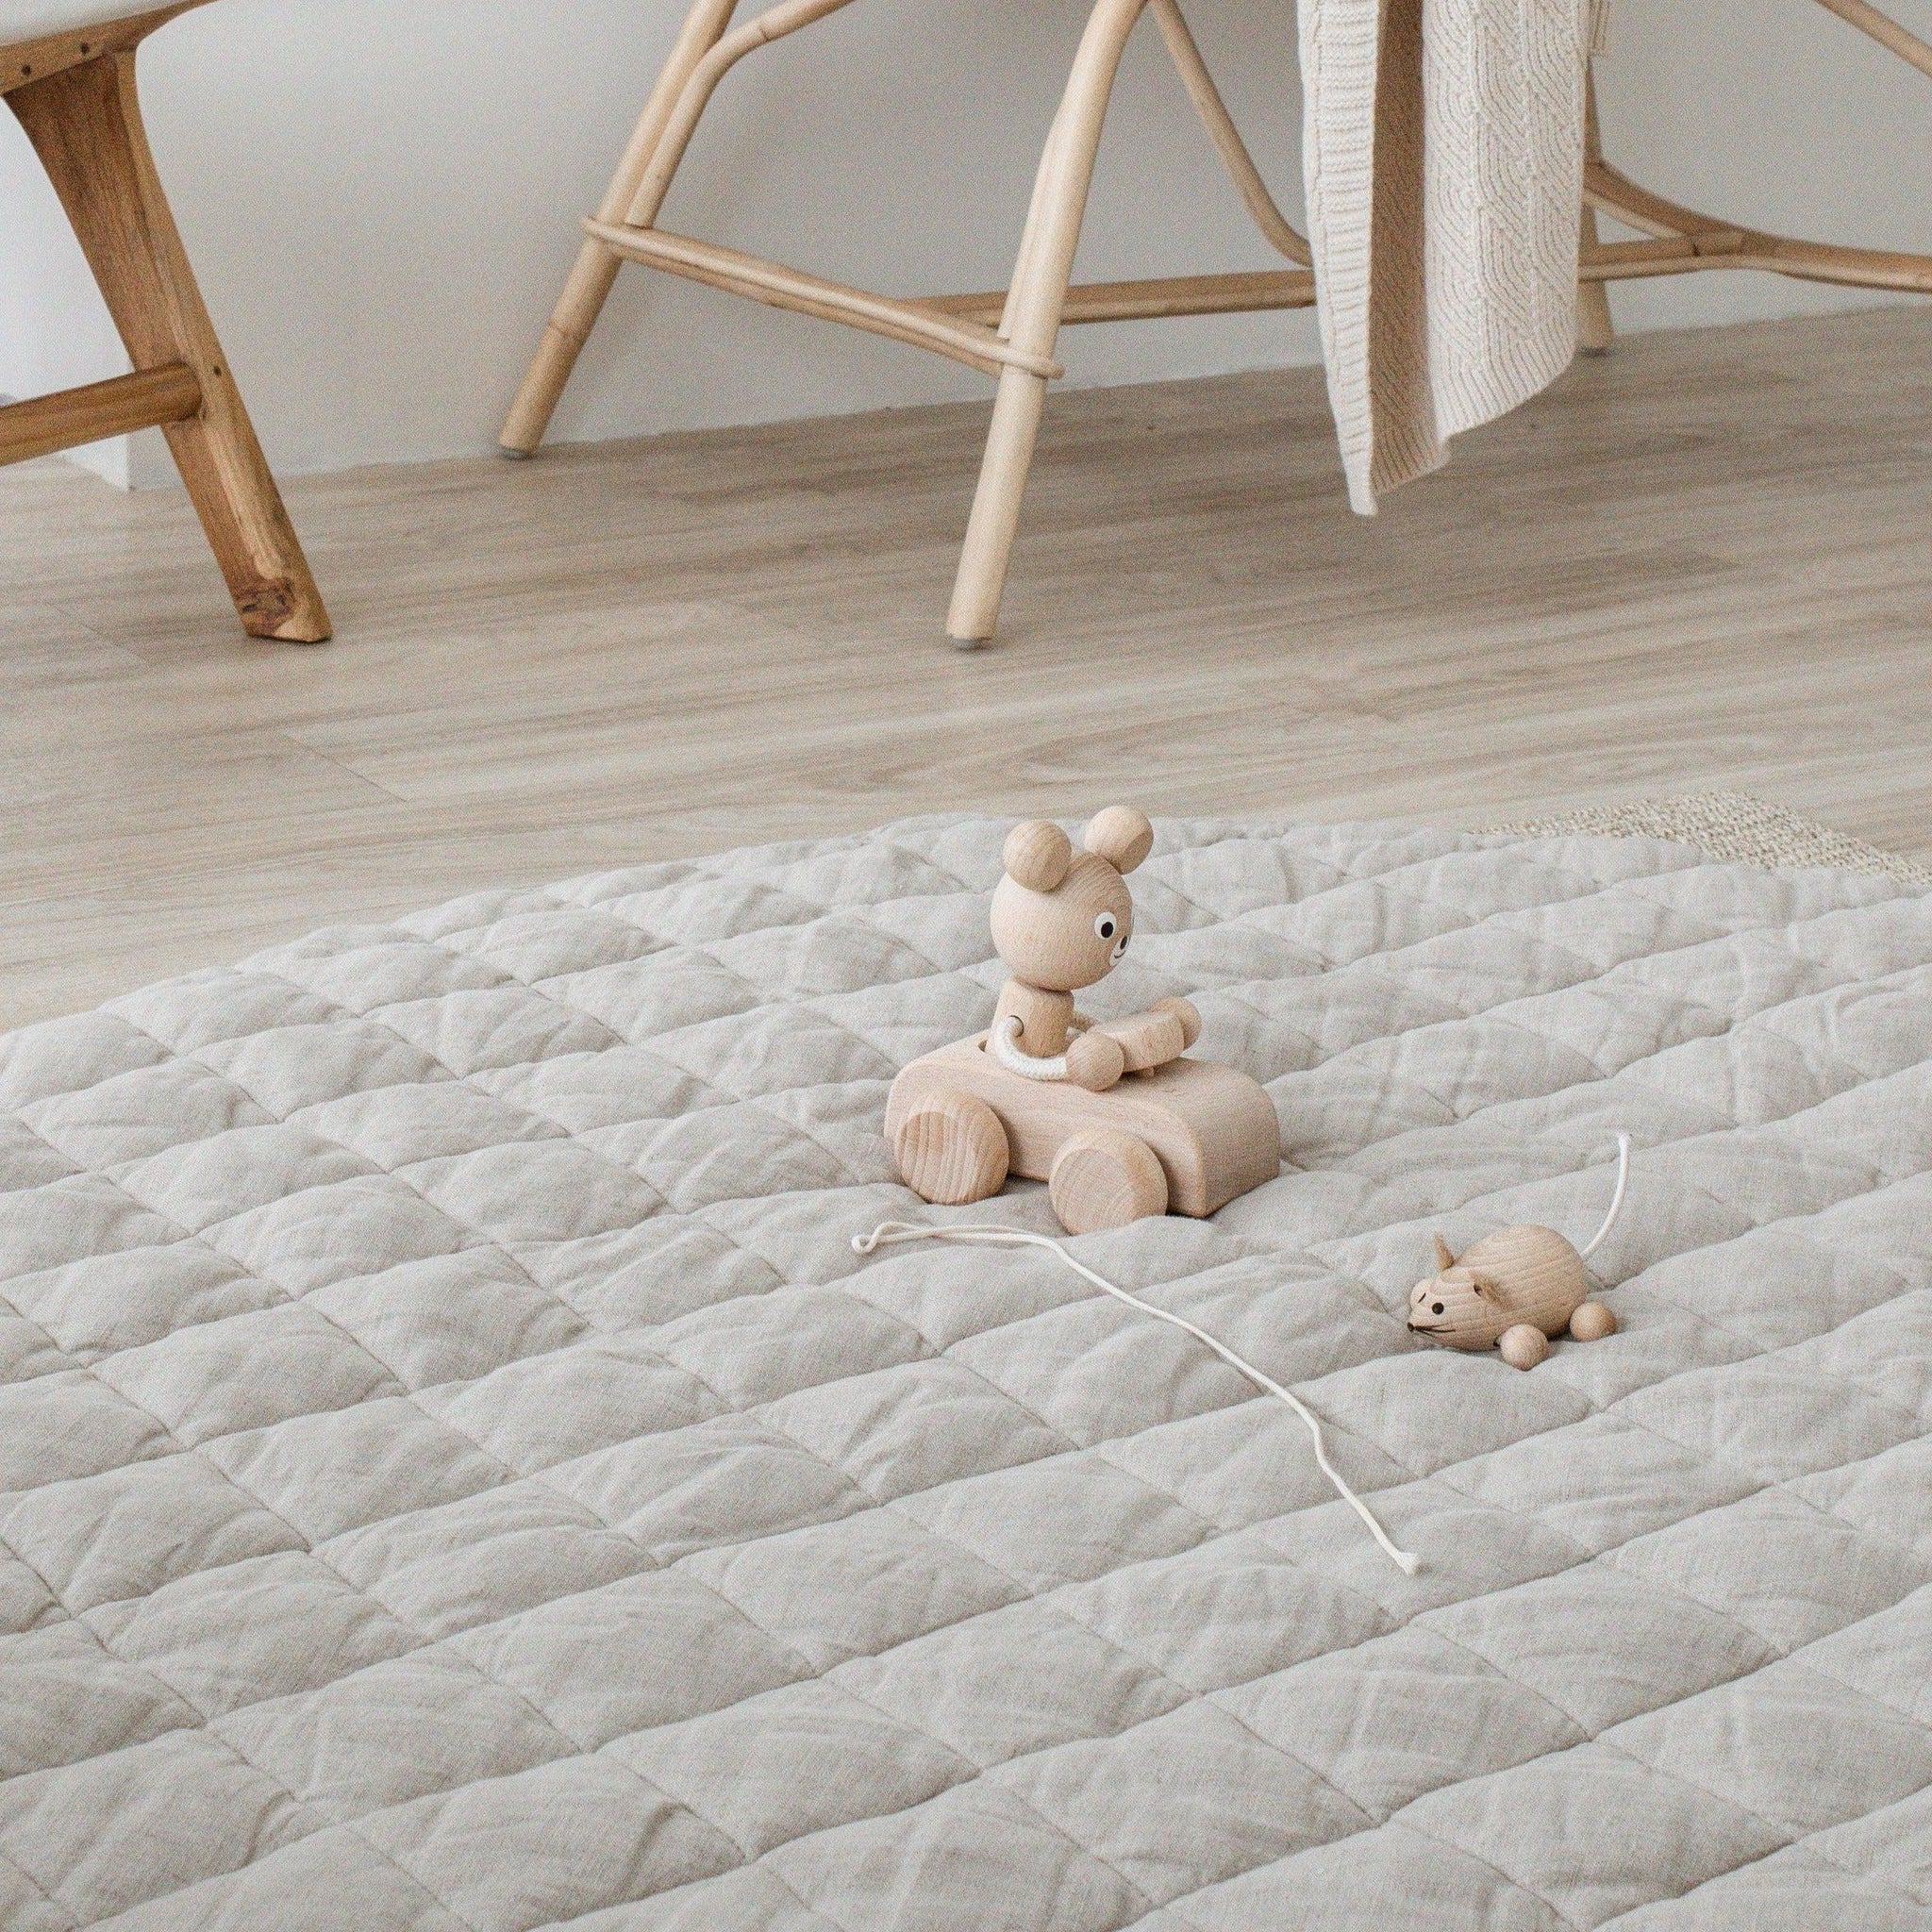 Our Warren Hill baby play mat is made from 100% Pure French Flax Linen with a soft, polyester filling that provides cushion and support for your child's delicate skin. Our linen is stonewashed giving it that beautiful soft, worn-in feel from the first time your child plays on it. Linen is naturally hypoallergenic, extremely durable, and one of the most sustainable materials to harvest and produce in the textile industry.